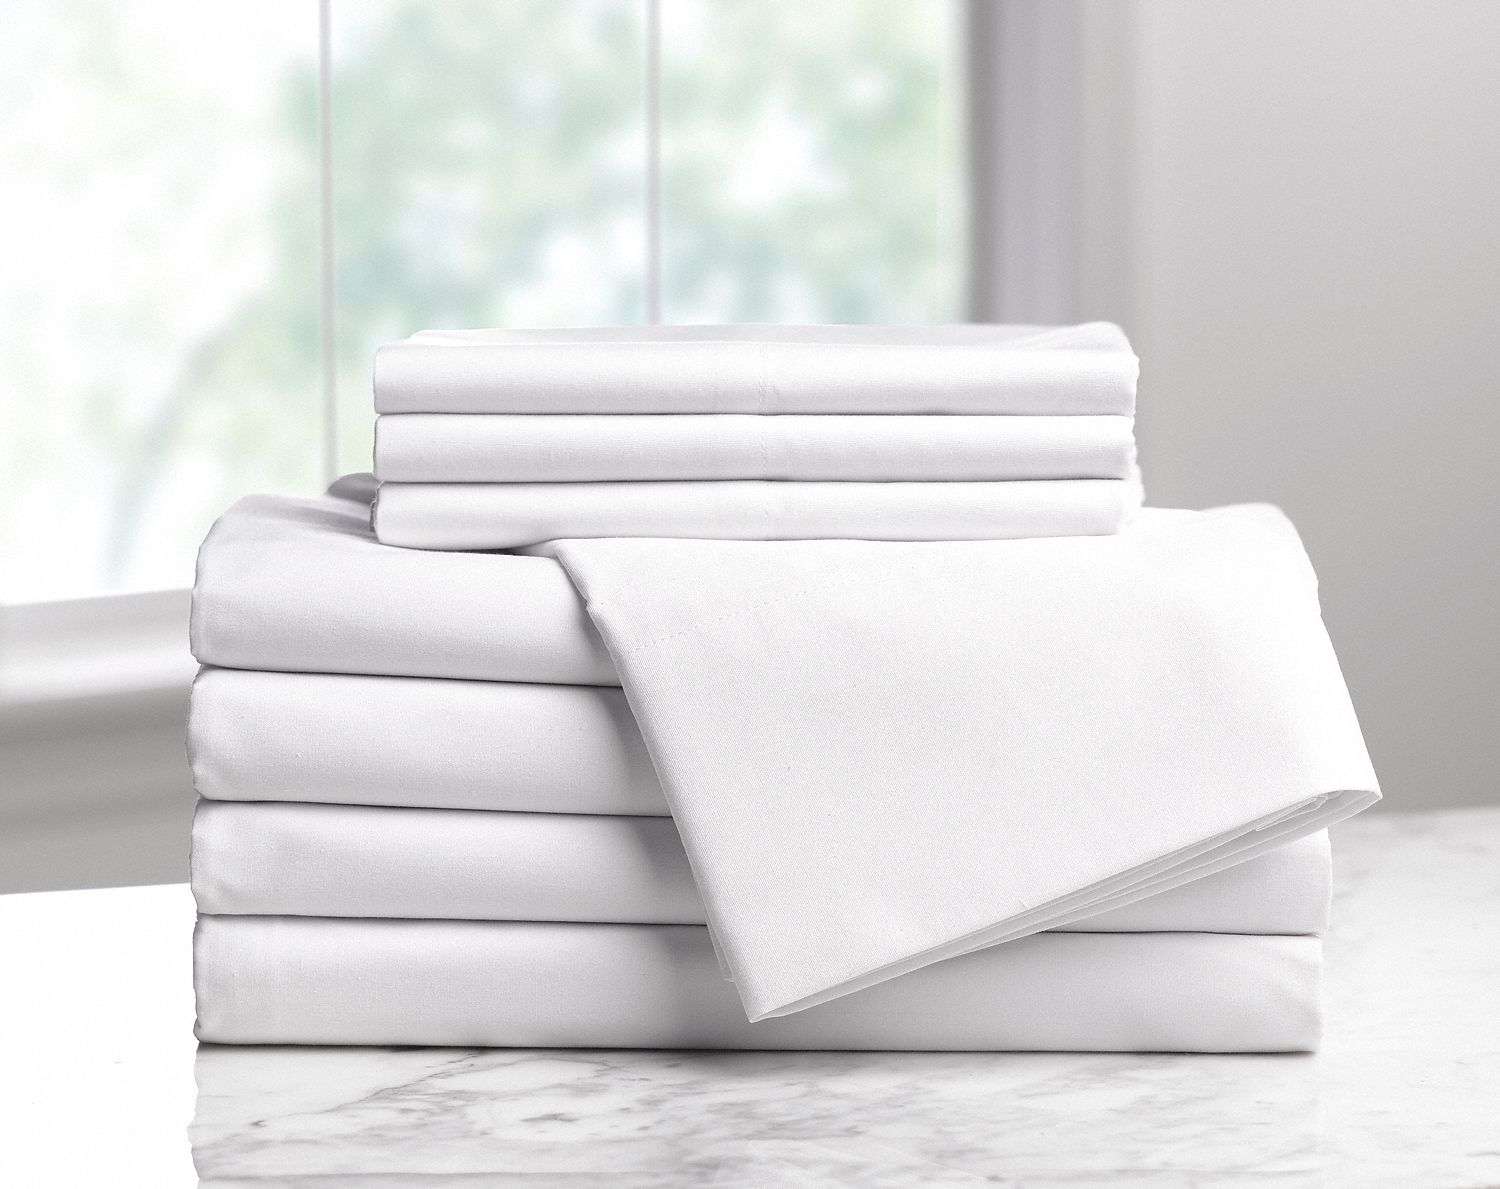 Fitted Sheet: Fitted, Twin XL, 39 in Wd, 80 in Lg, 60% Cotton/40% Polyester Fabric, 6 PK